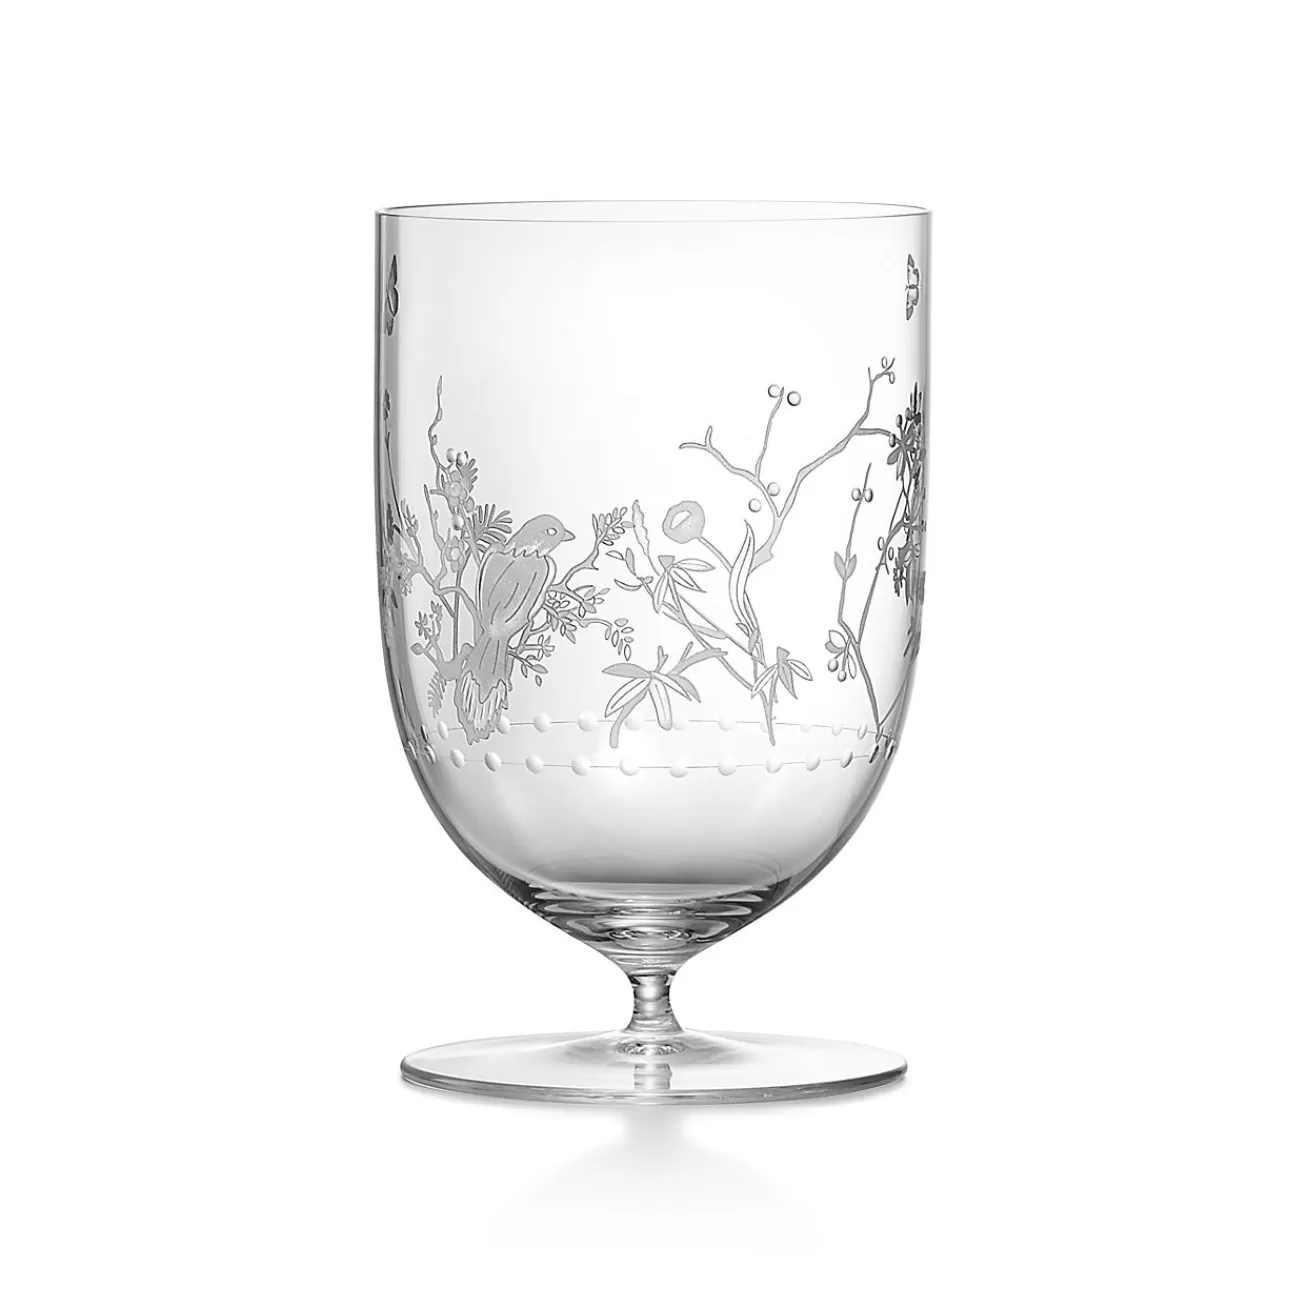 Tiffany & Co. Tiffany Jardin Water Glass in Hand-etched Glass | ^ The Home | Housewarming Gifts